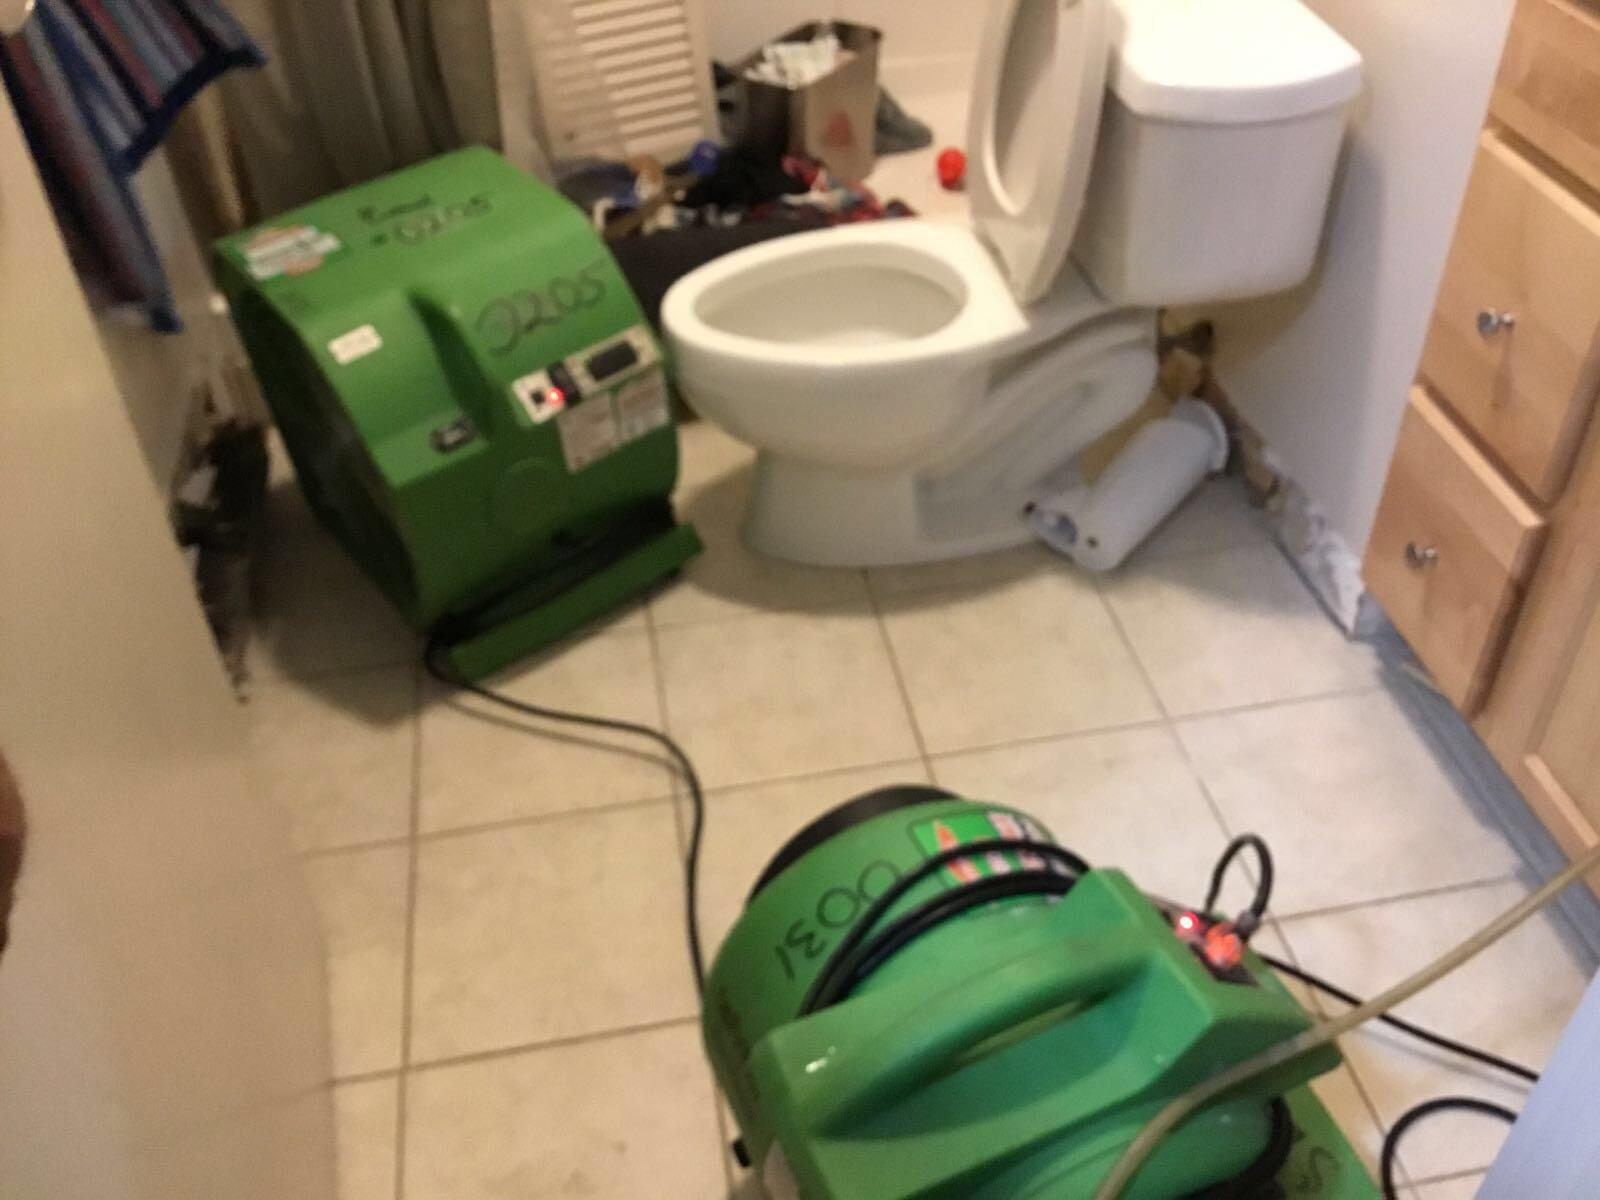 Our SERVPRO crew working on a cleanup job after a plumbing failure.